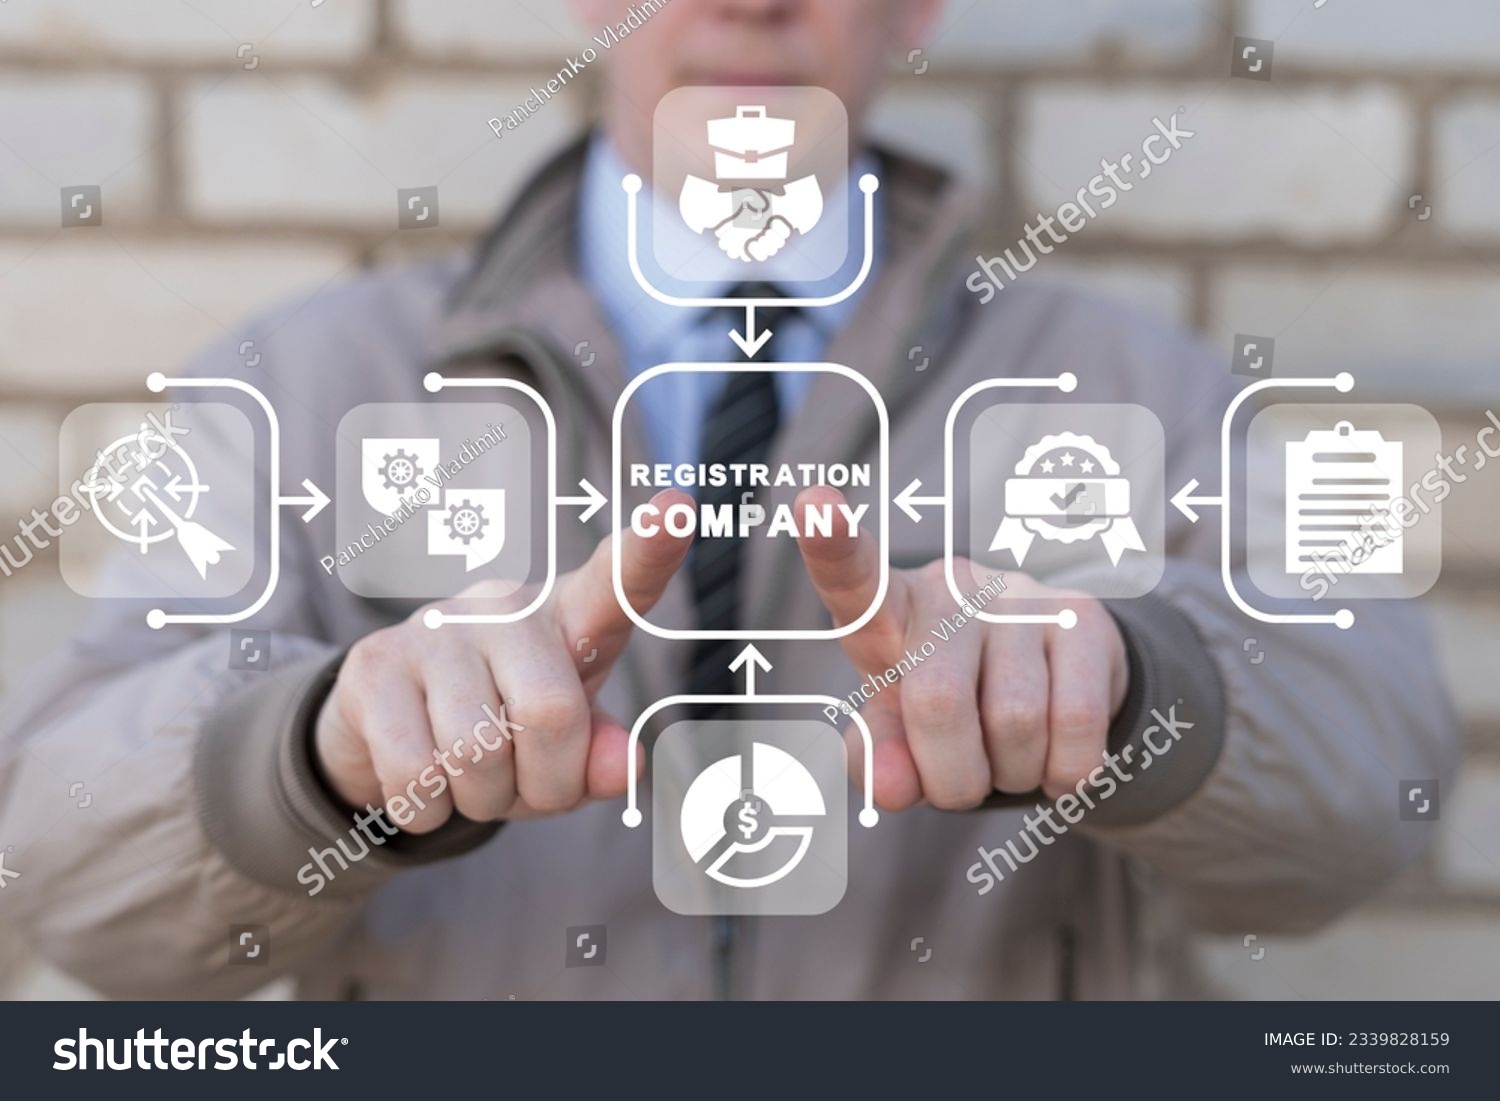 Man using virtual touch screen presses inscription: REGISTRATION COMPANY. New company registration concept. Business start up. Brand and identity building process. Company formation procedure. #2339828159